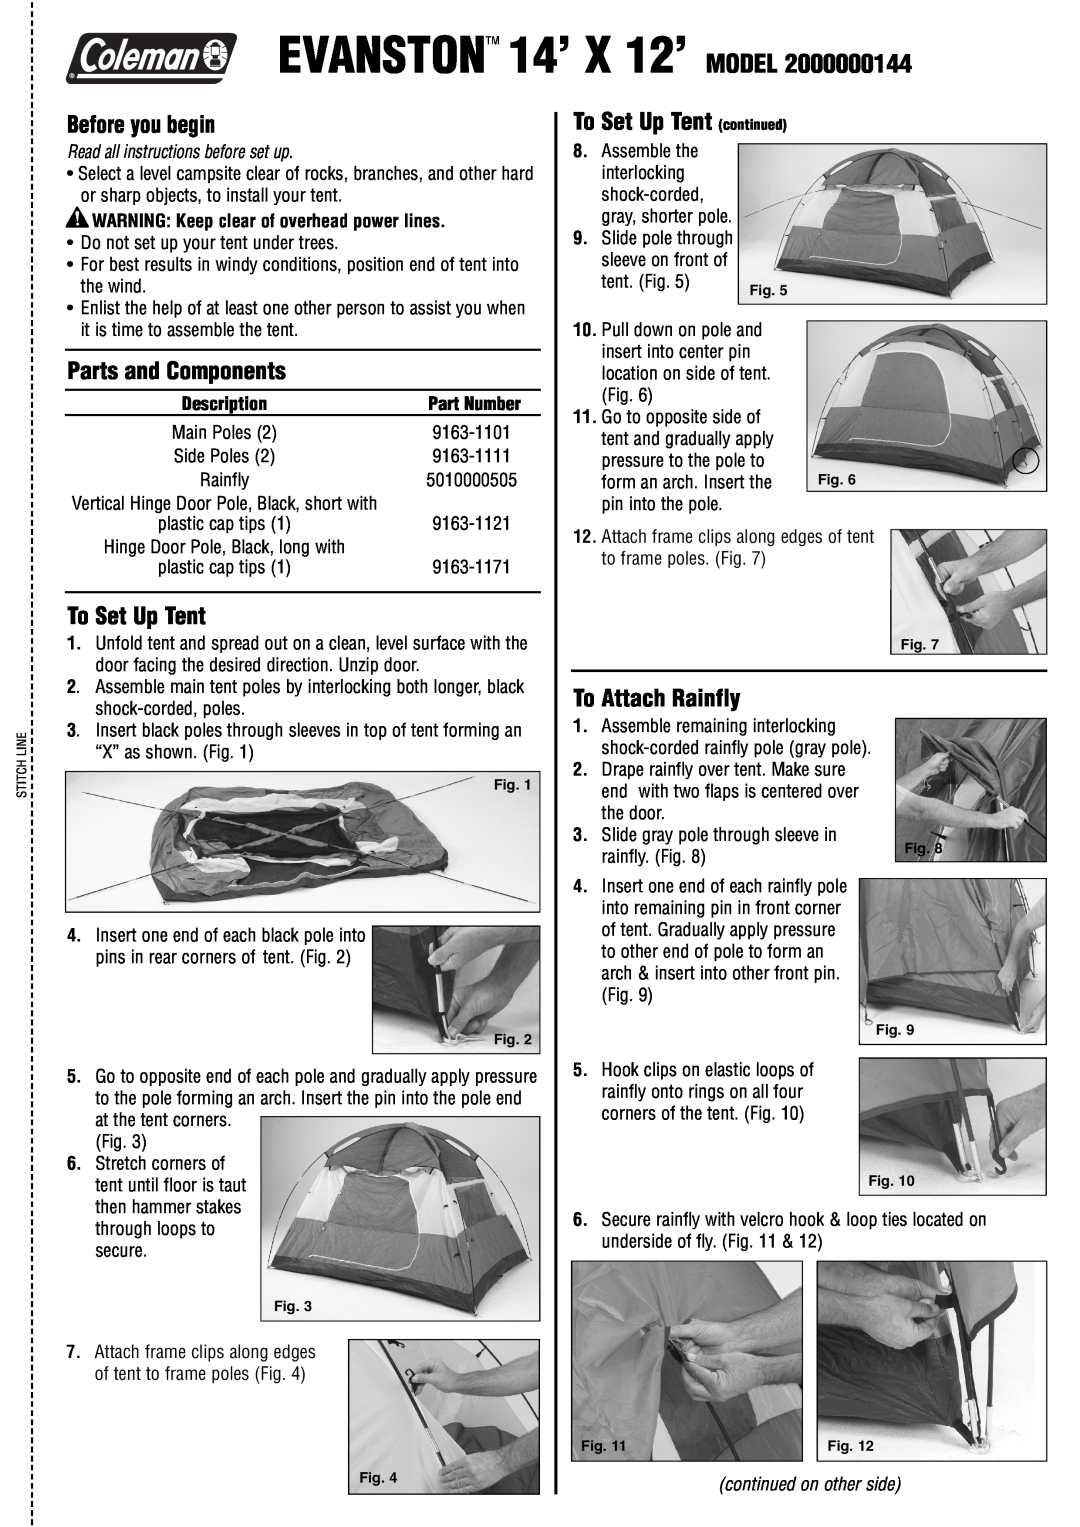 Coleman 2000000144 manual Before you begin, Parts and Components, To Set Up Tent continued, To Attach Rainfly 